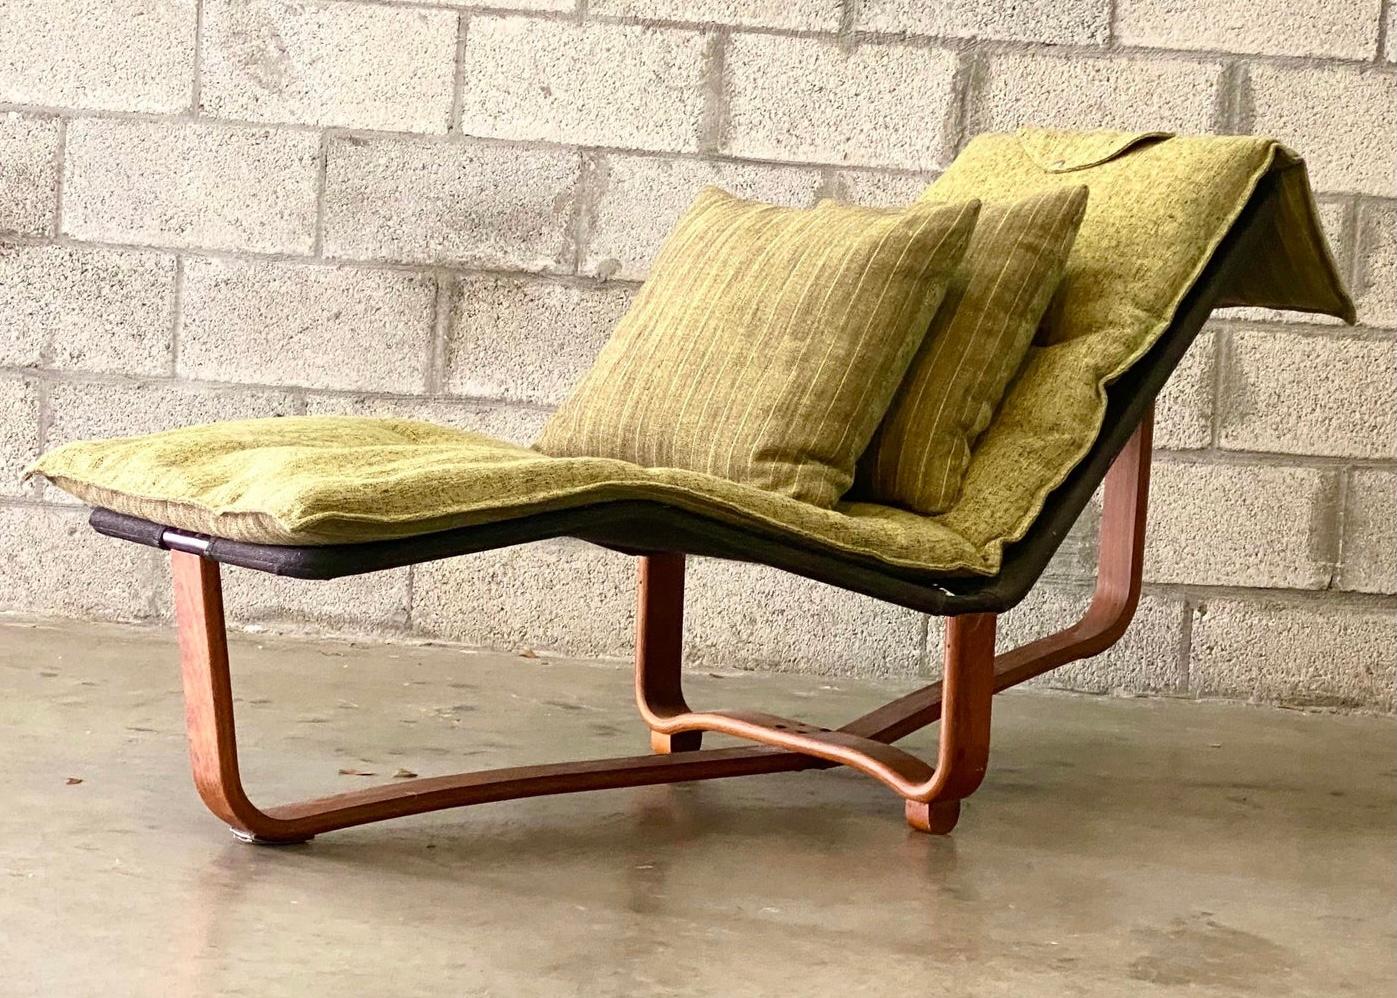 Exceptional midcentury chaise lounge. Designed by Ingmar Relling and produced by Westnofa. Beautiful bent wood floating frame with a reversible cushion. Acquired from a Palm Beach estate.